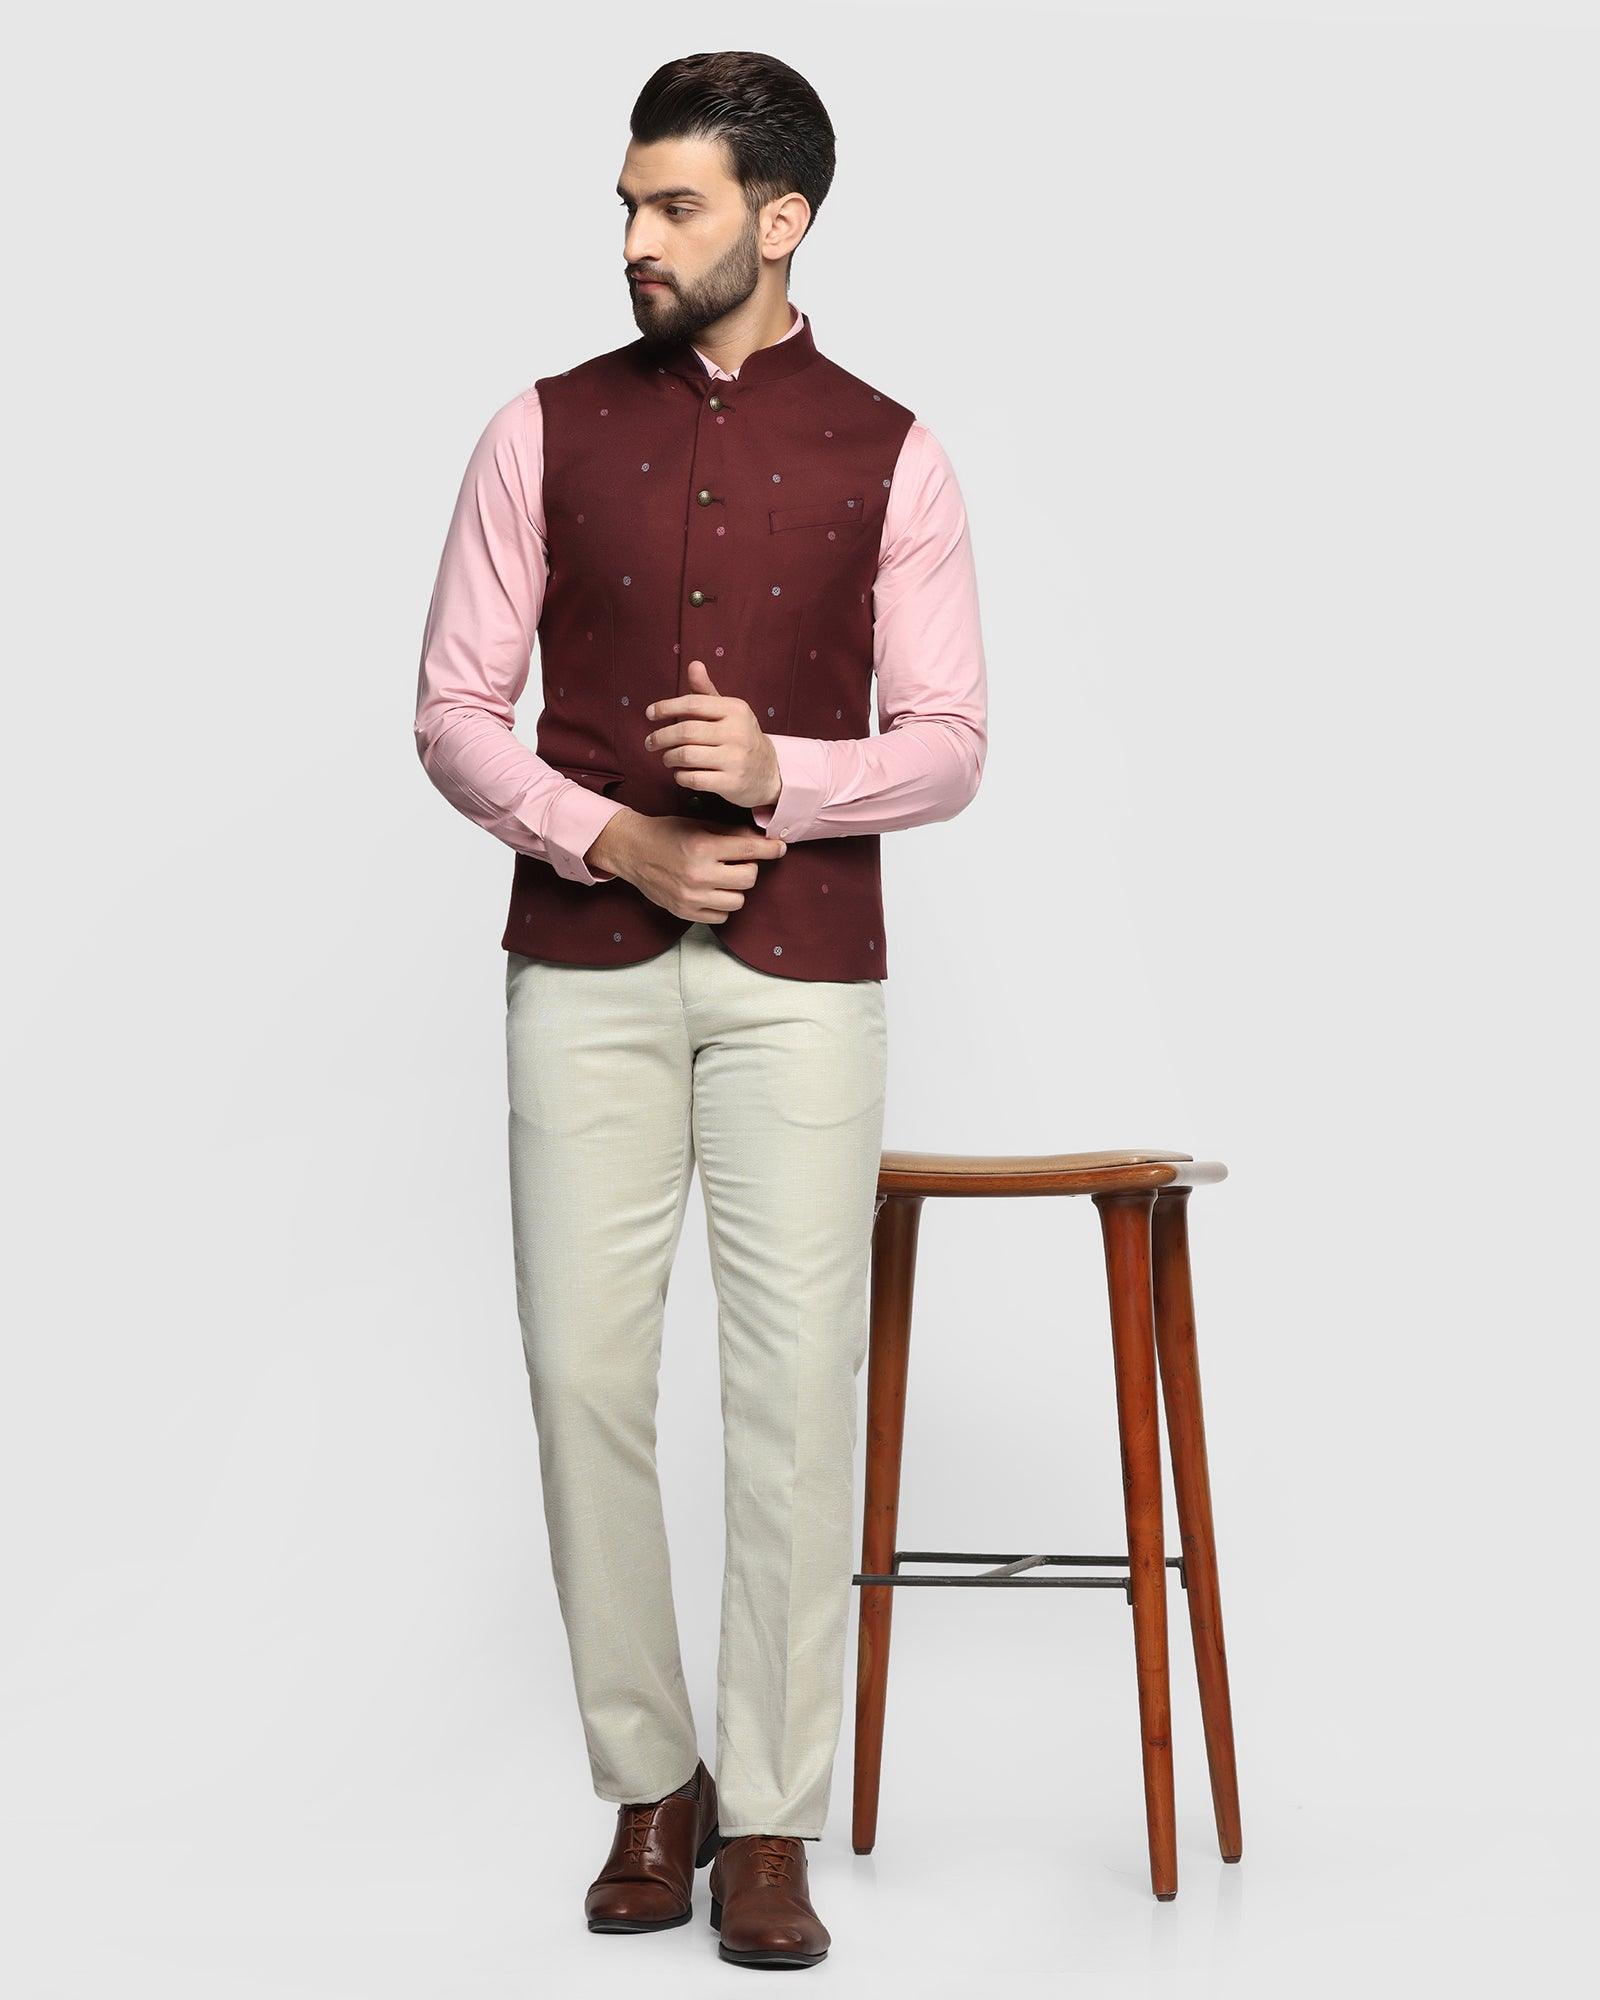 Solid Color Velvet Nehru Jacket in Maroon | Nehru jackets, Men fashion  casual outfits, Jackets